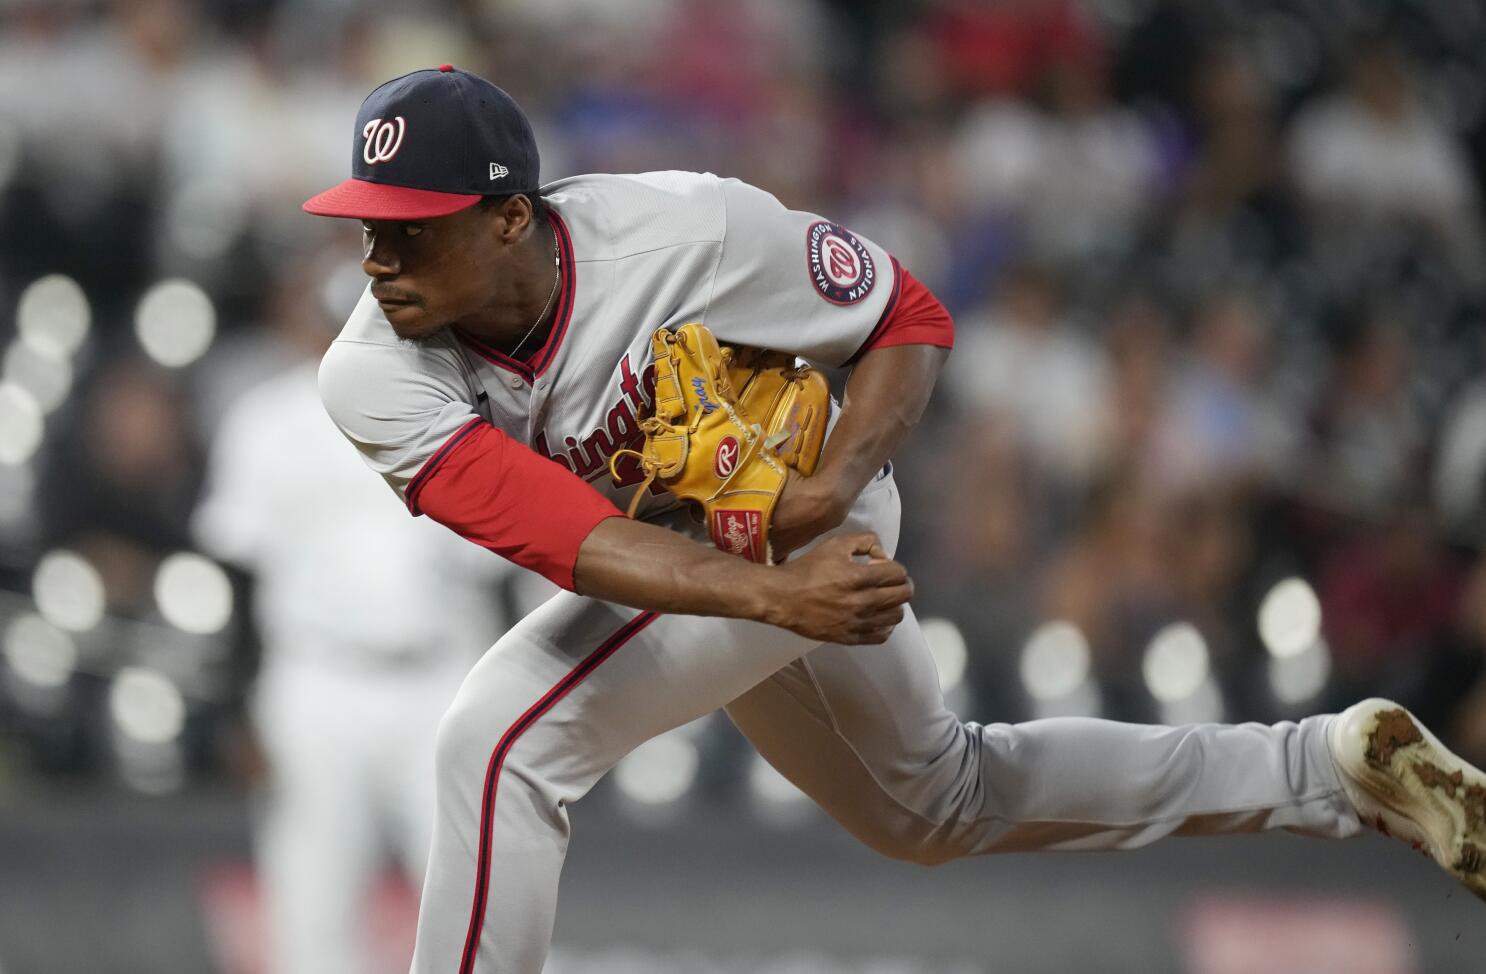 Washington Nationals & Alcides Escobar decide to do it again in